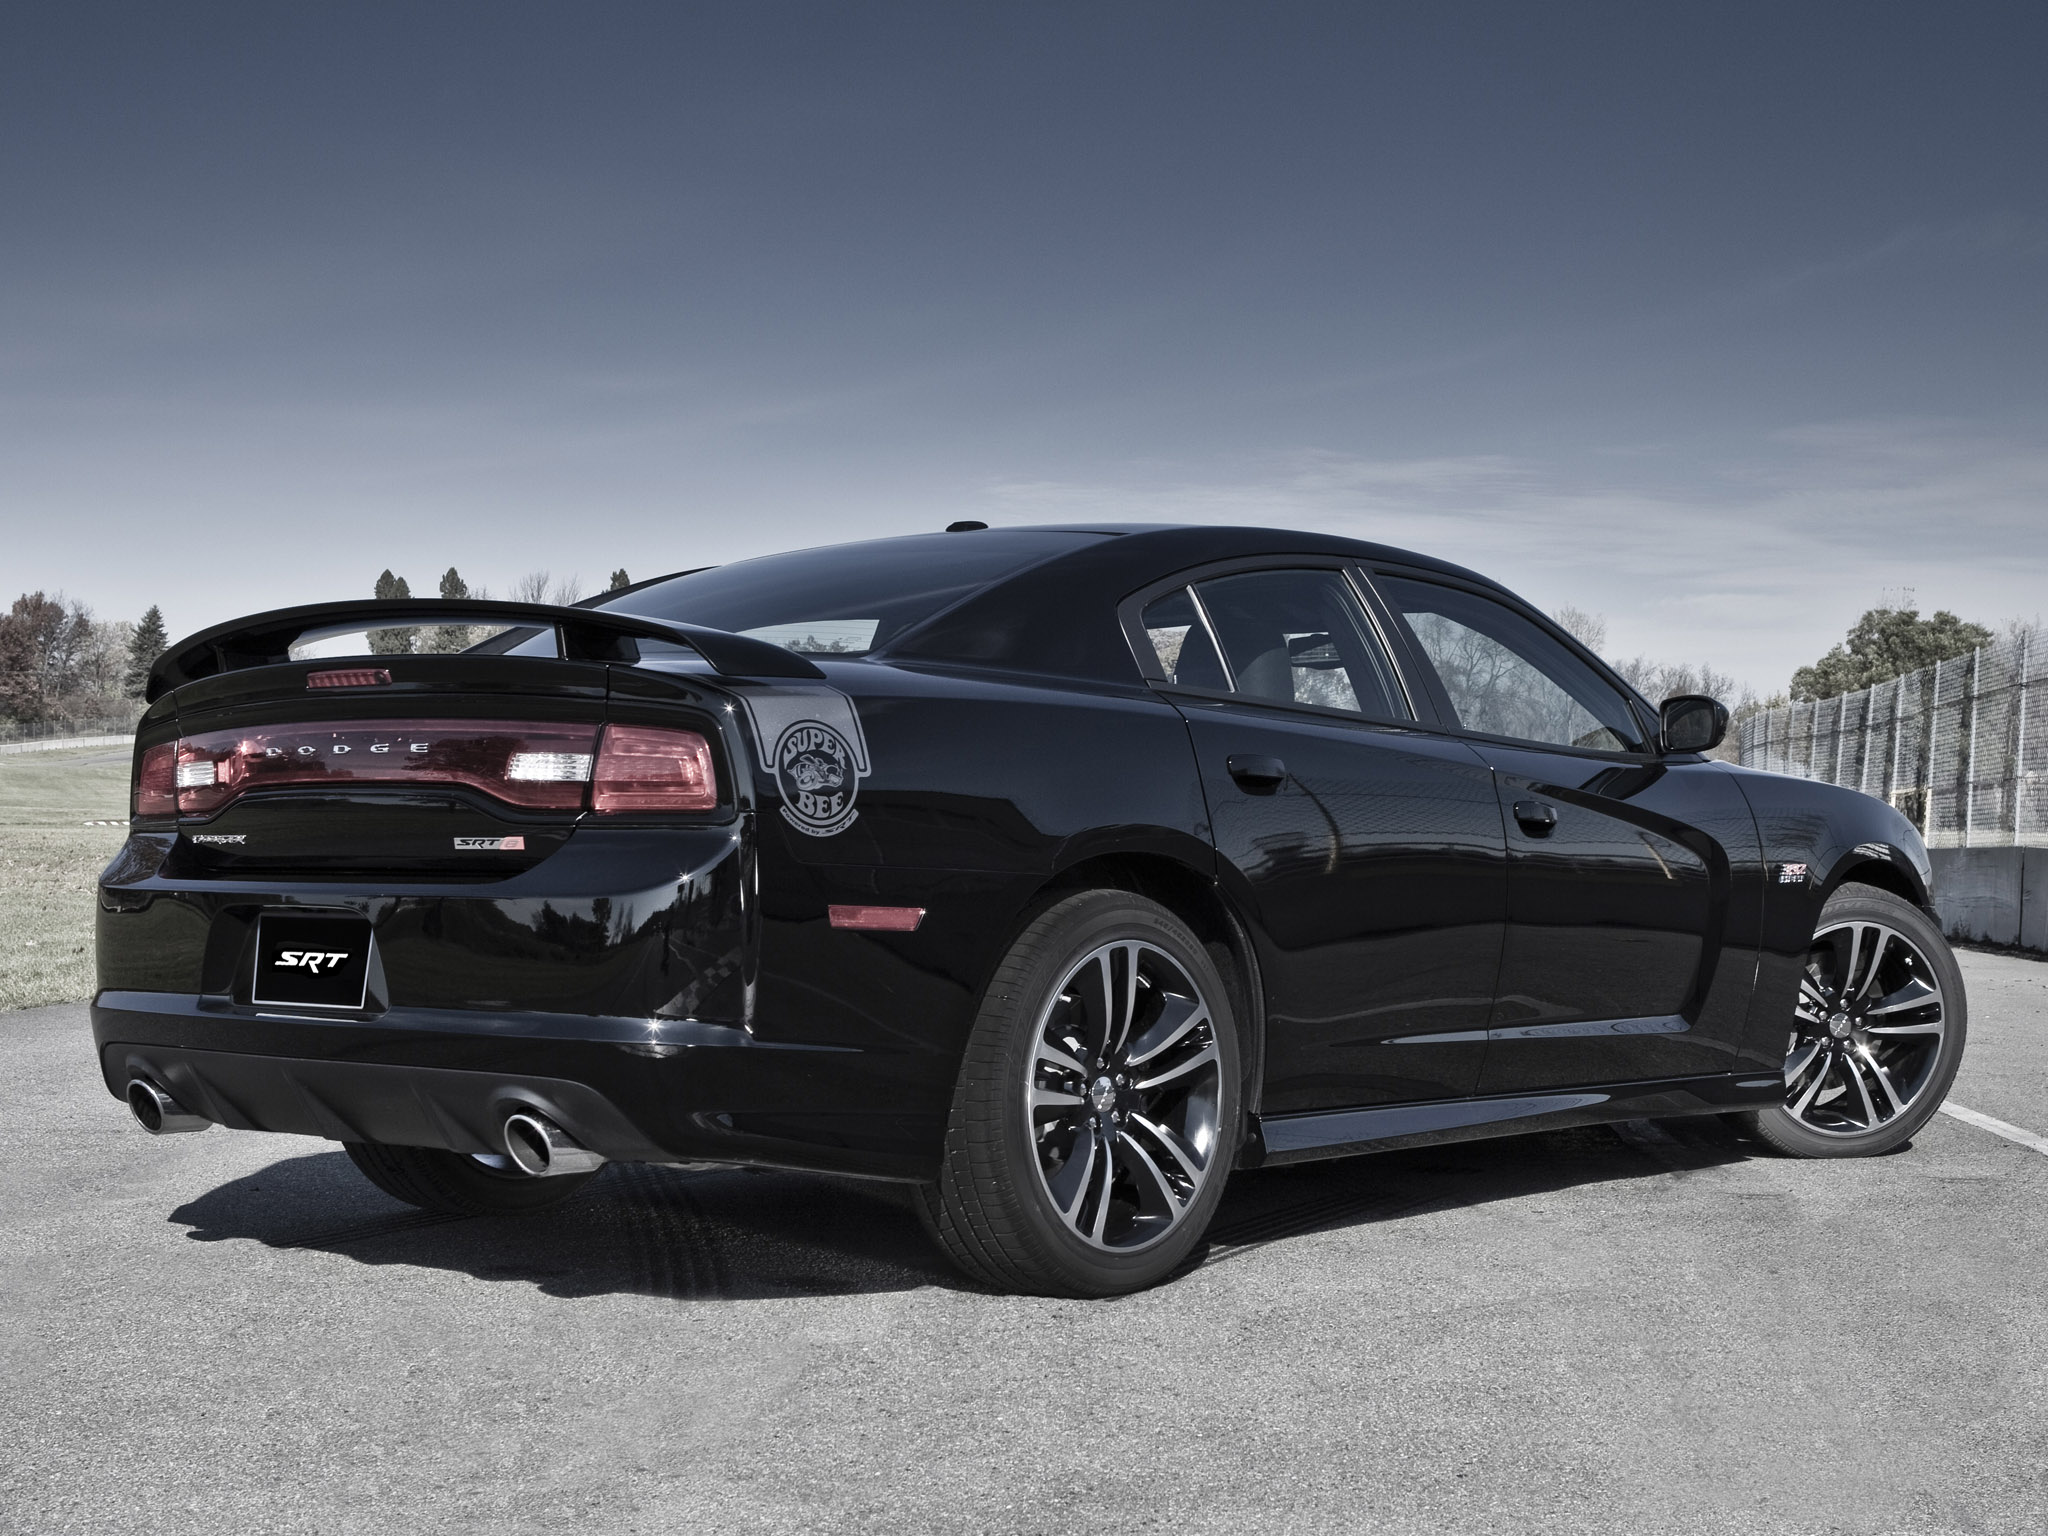 2012, Dodge, Charger, Srt8, Super, Bee, Muscle, Ds Wallpaper